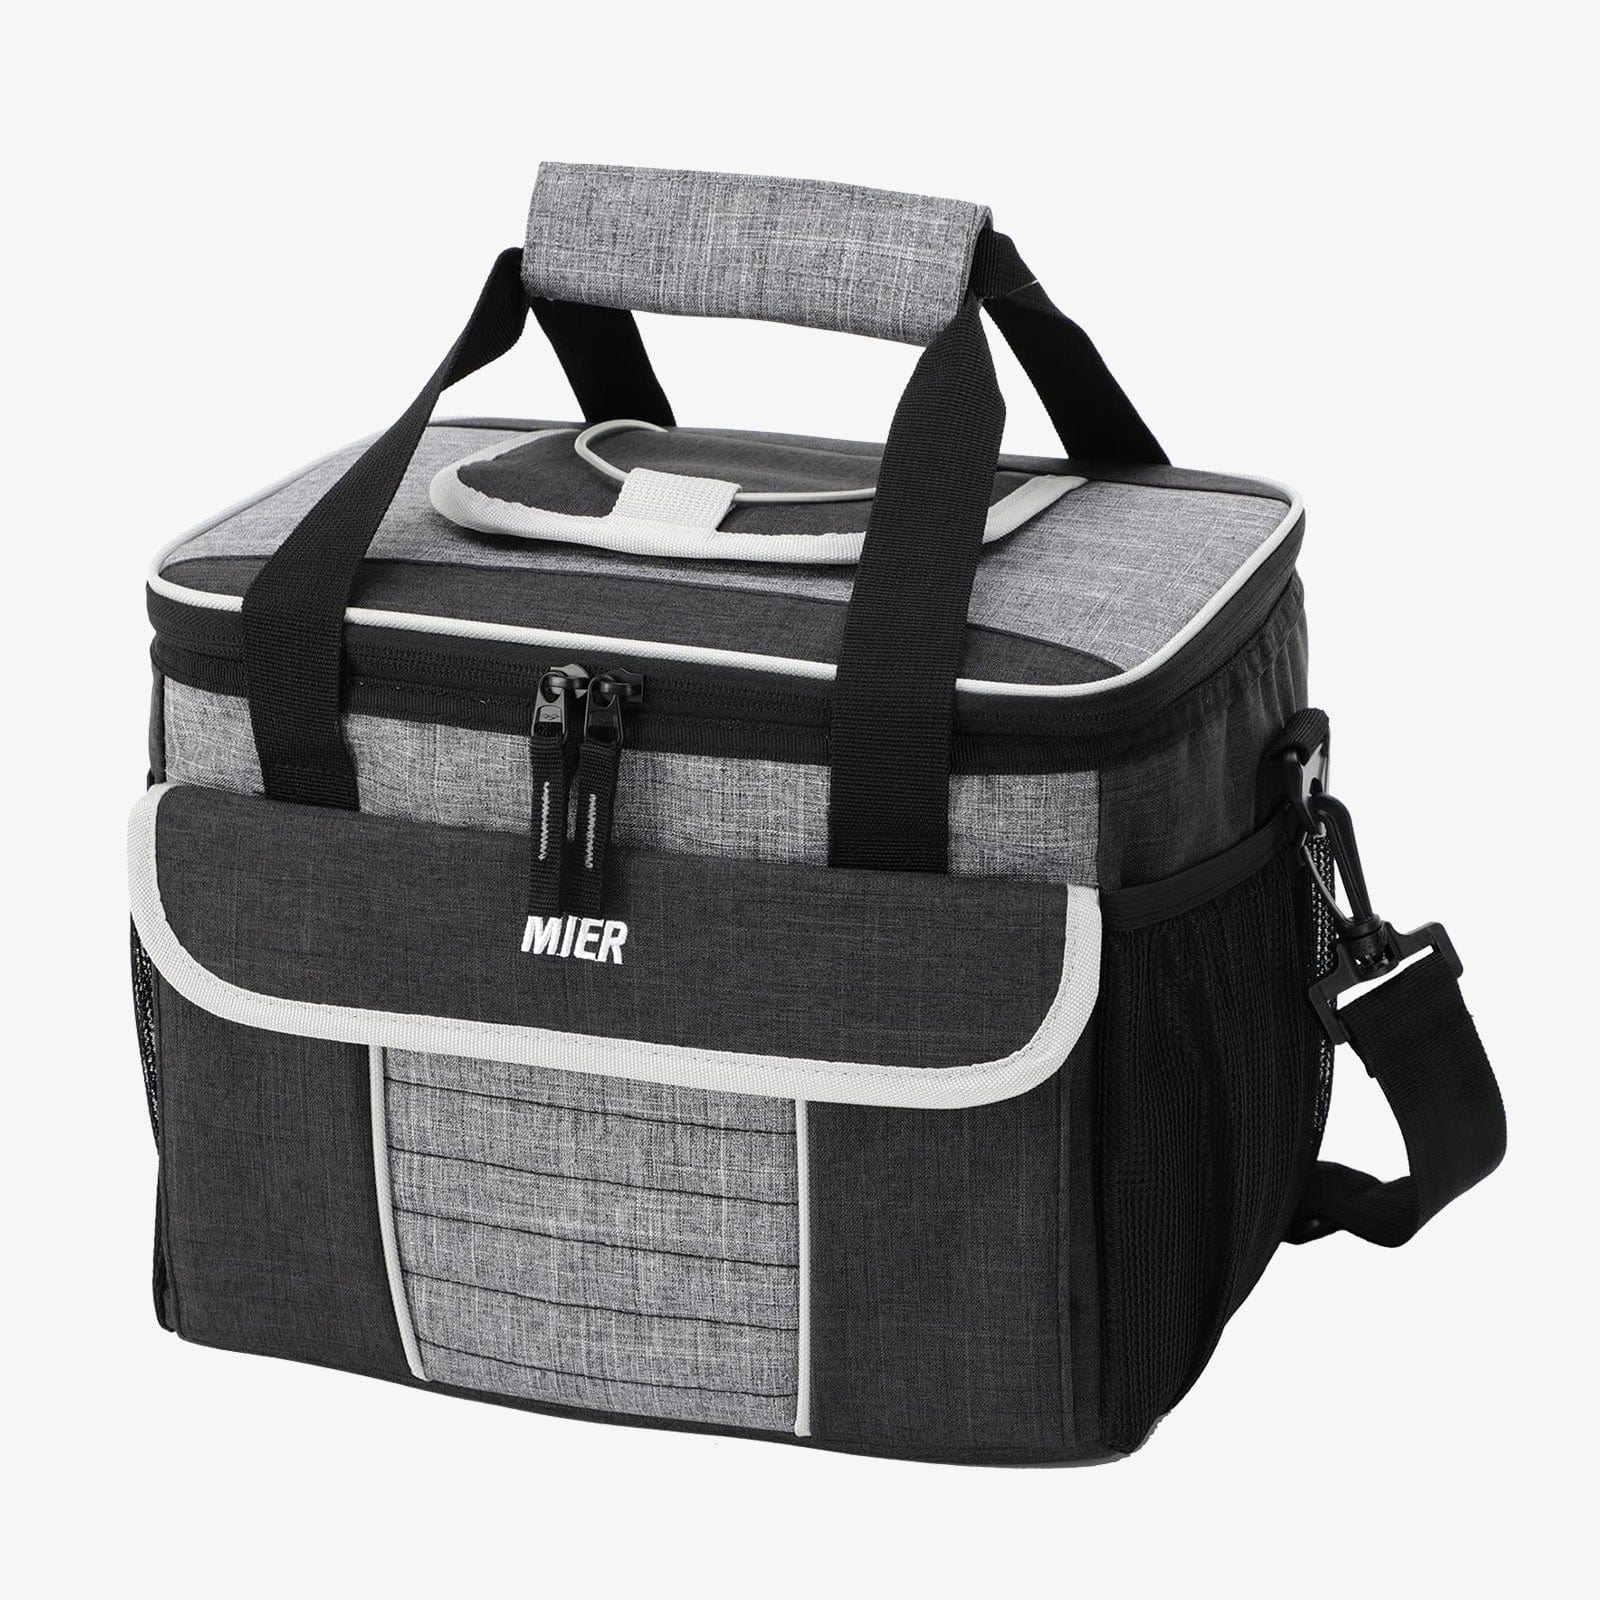 MIER Large Lunch Box for Men, 18 Cans Soft Lunchbox Cooler Bag Insulated  Lunch Bags for Adults Work Beach Travel, Top Flap & Multiple Pockets, Black  Black 18 Can